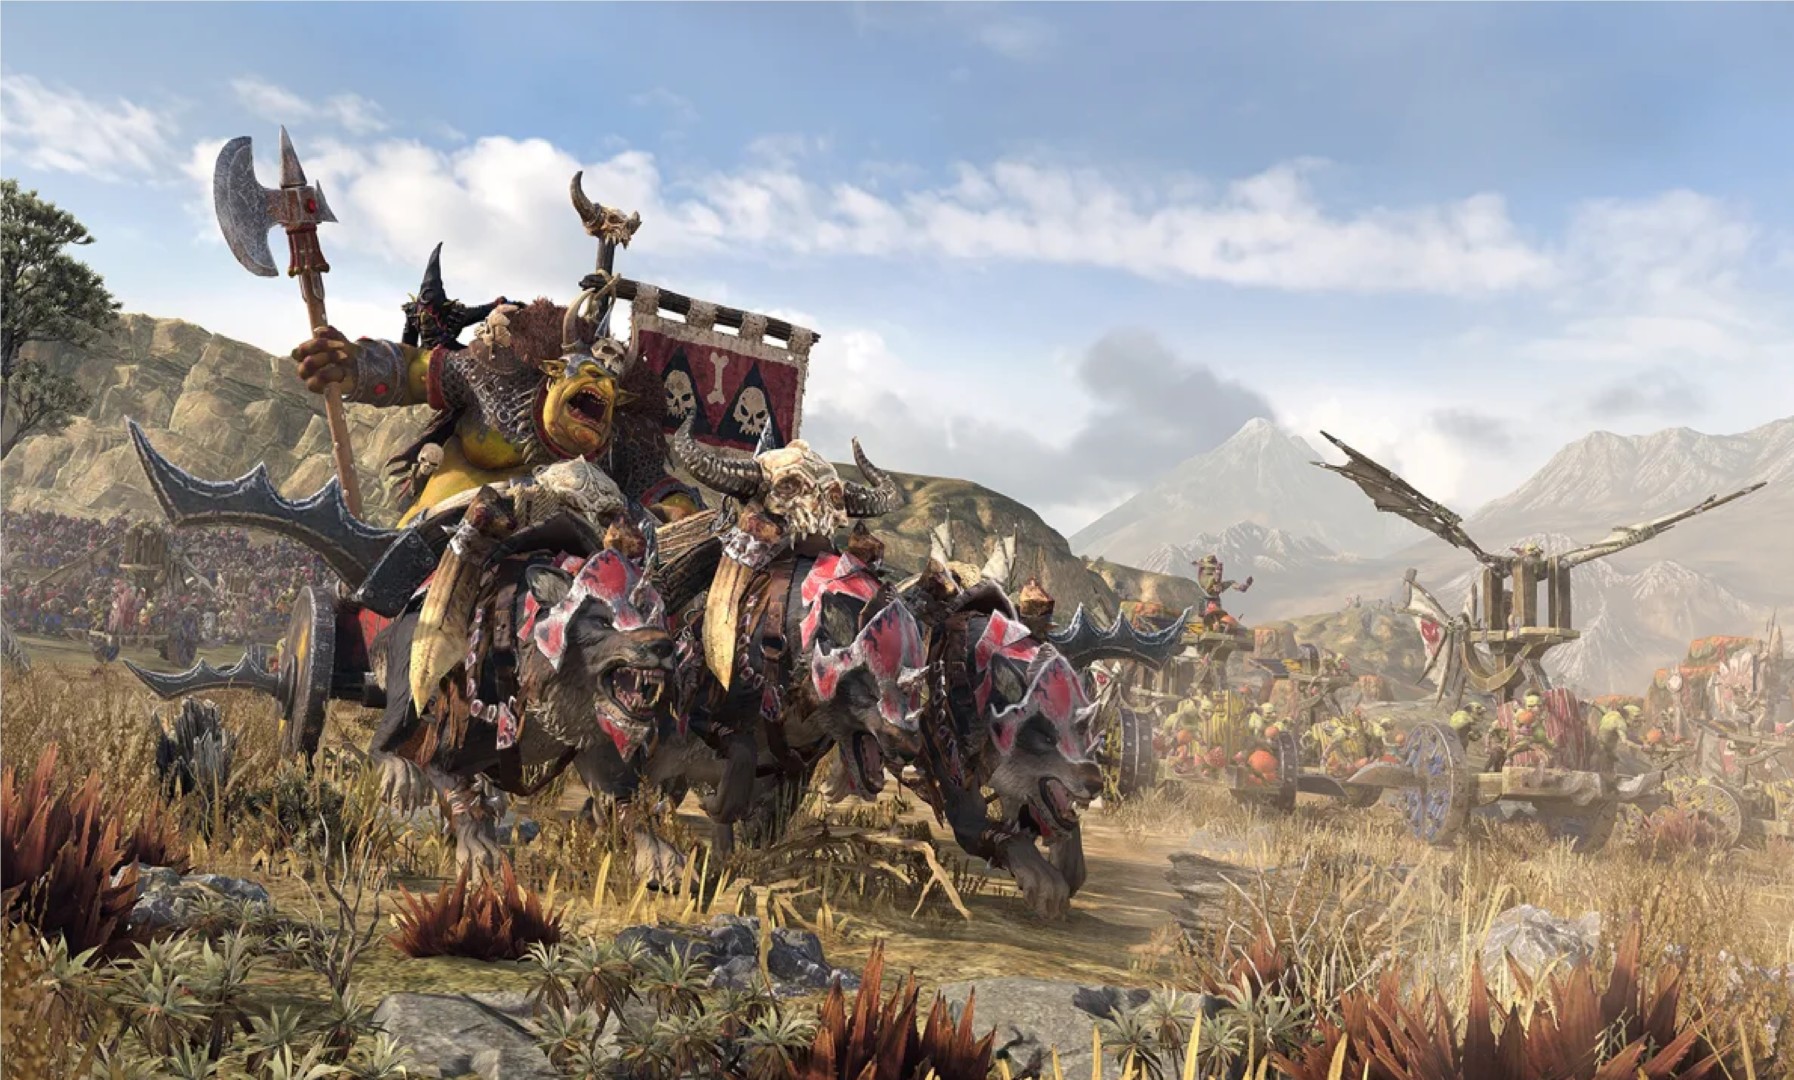 Total War: Warhammer II showcases Grom the Paunch in newest video - PC Invasion